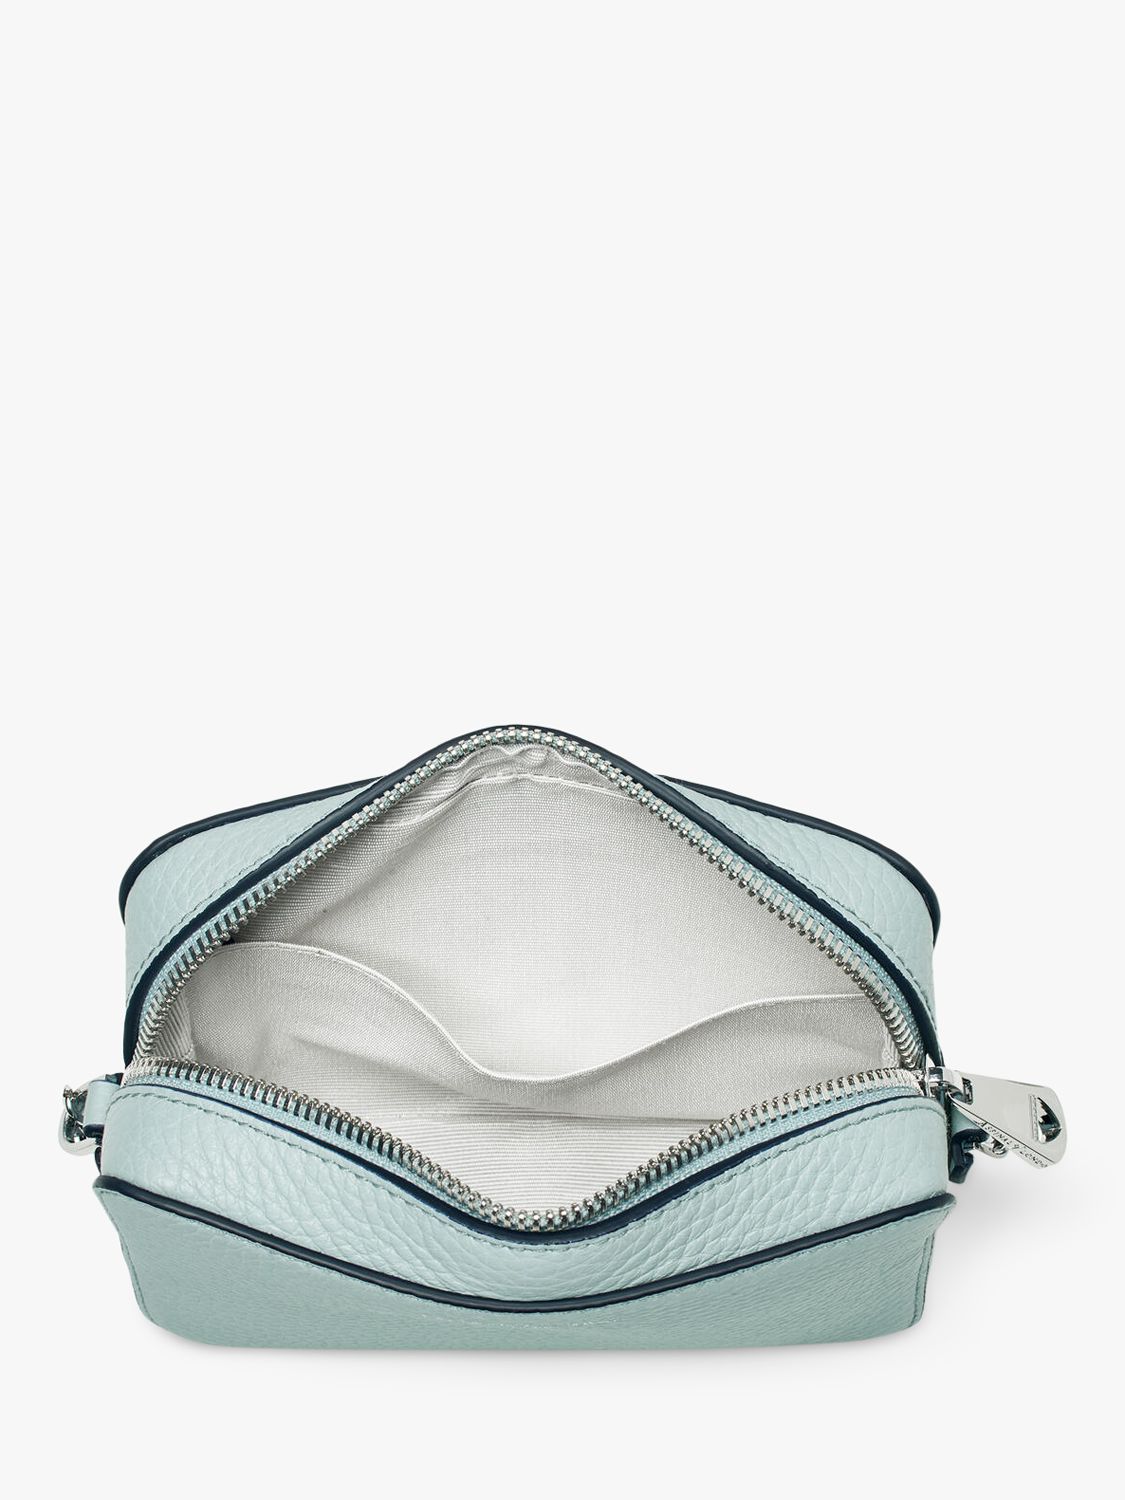 Aspinal of London Milly Pebble Leather Cross Body Bag, Pool Blue at ...